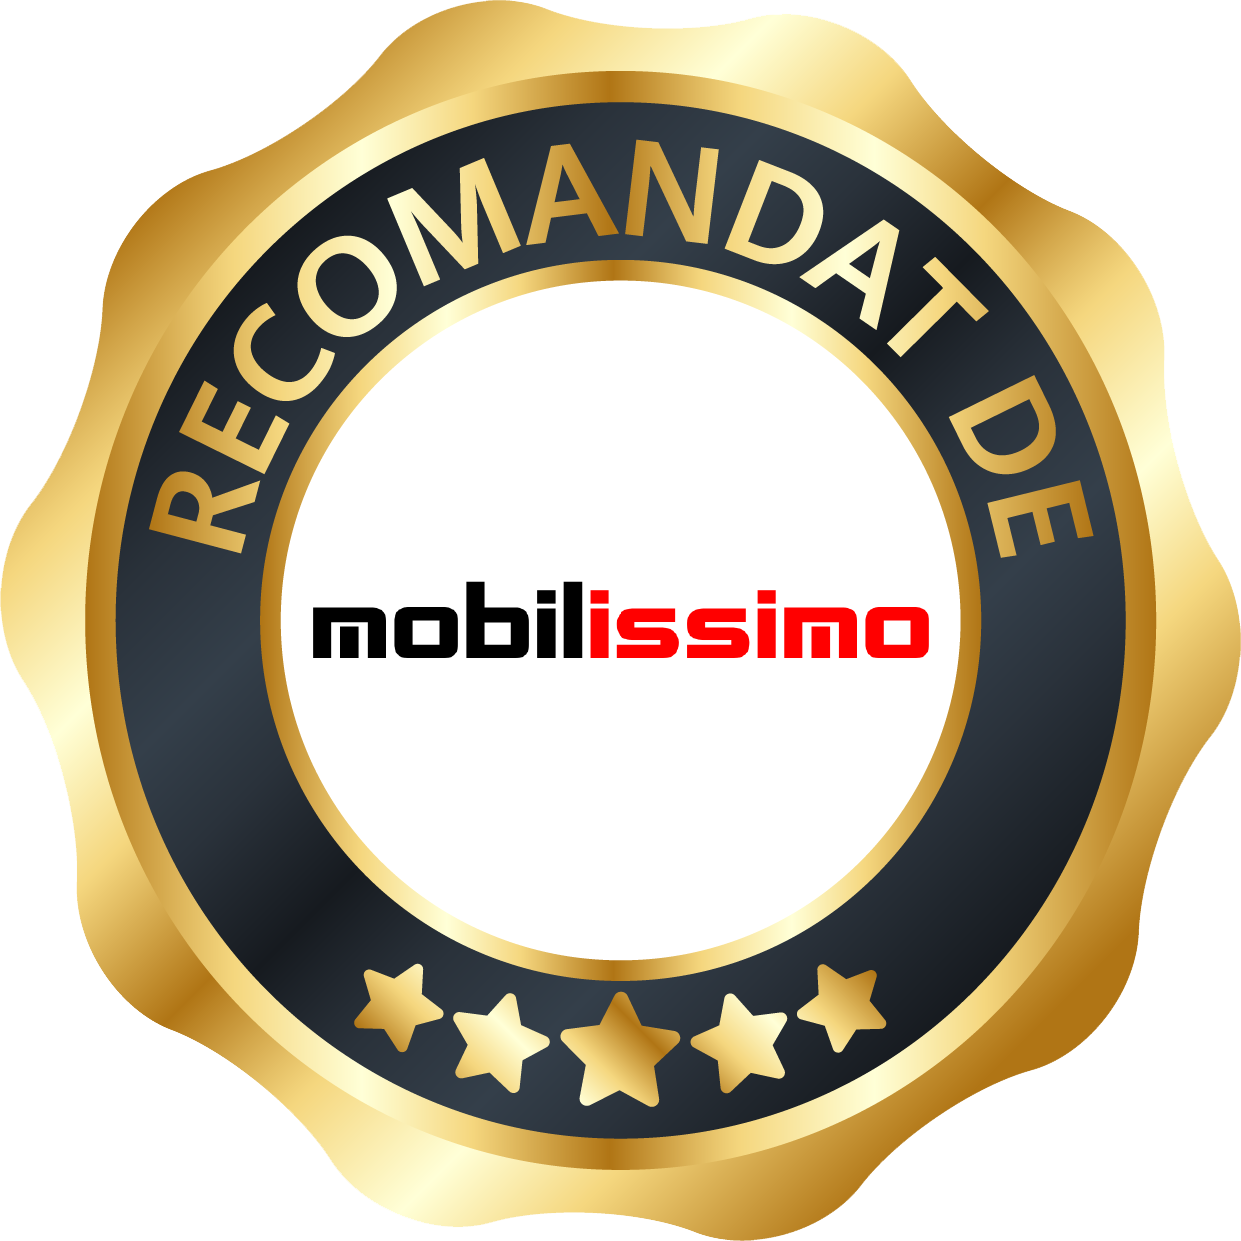 Recommended by Mobilissimo